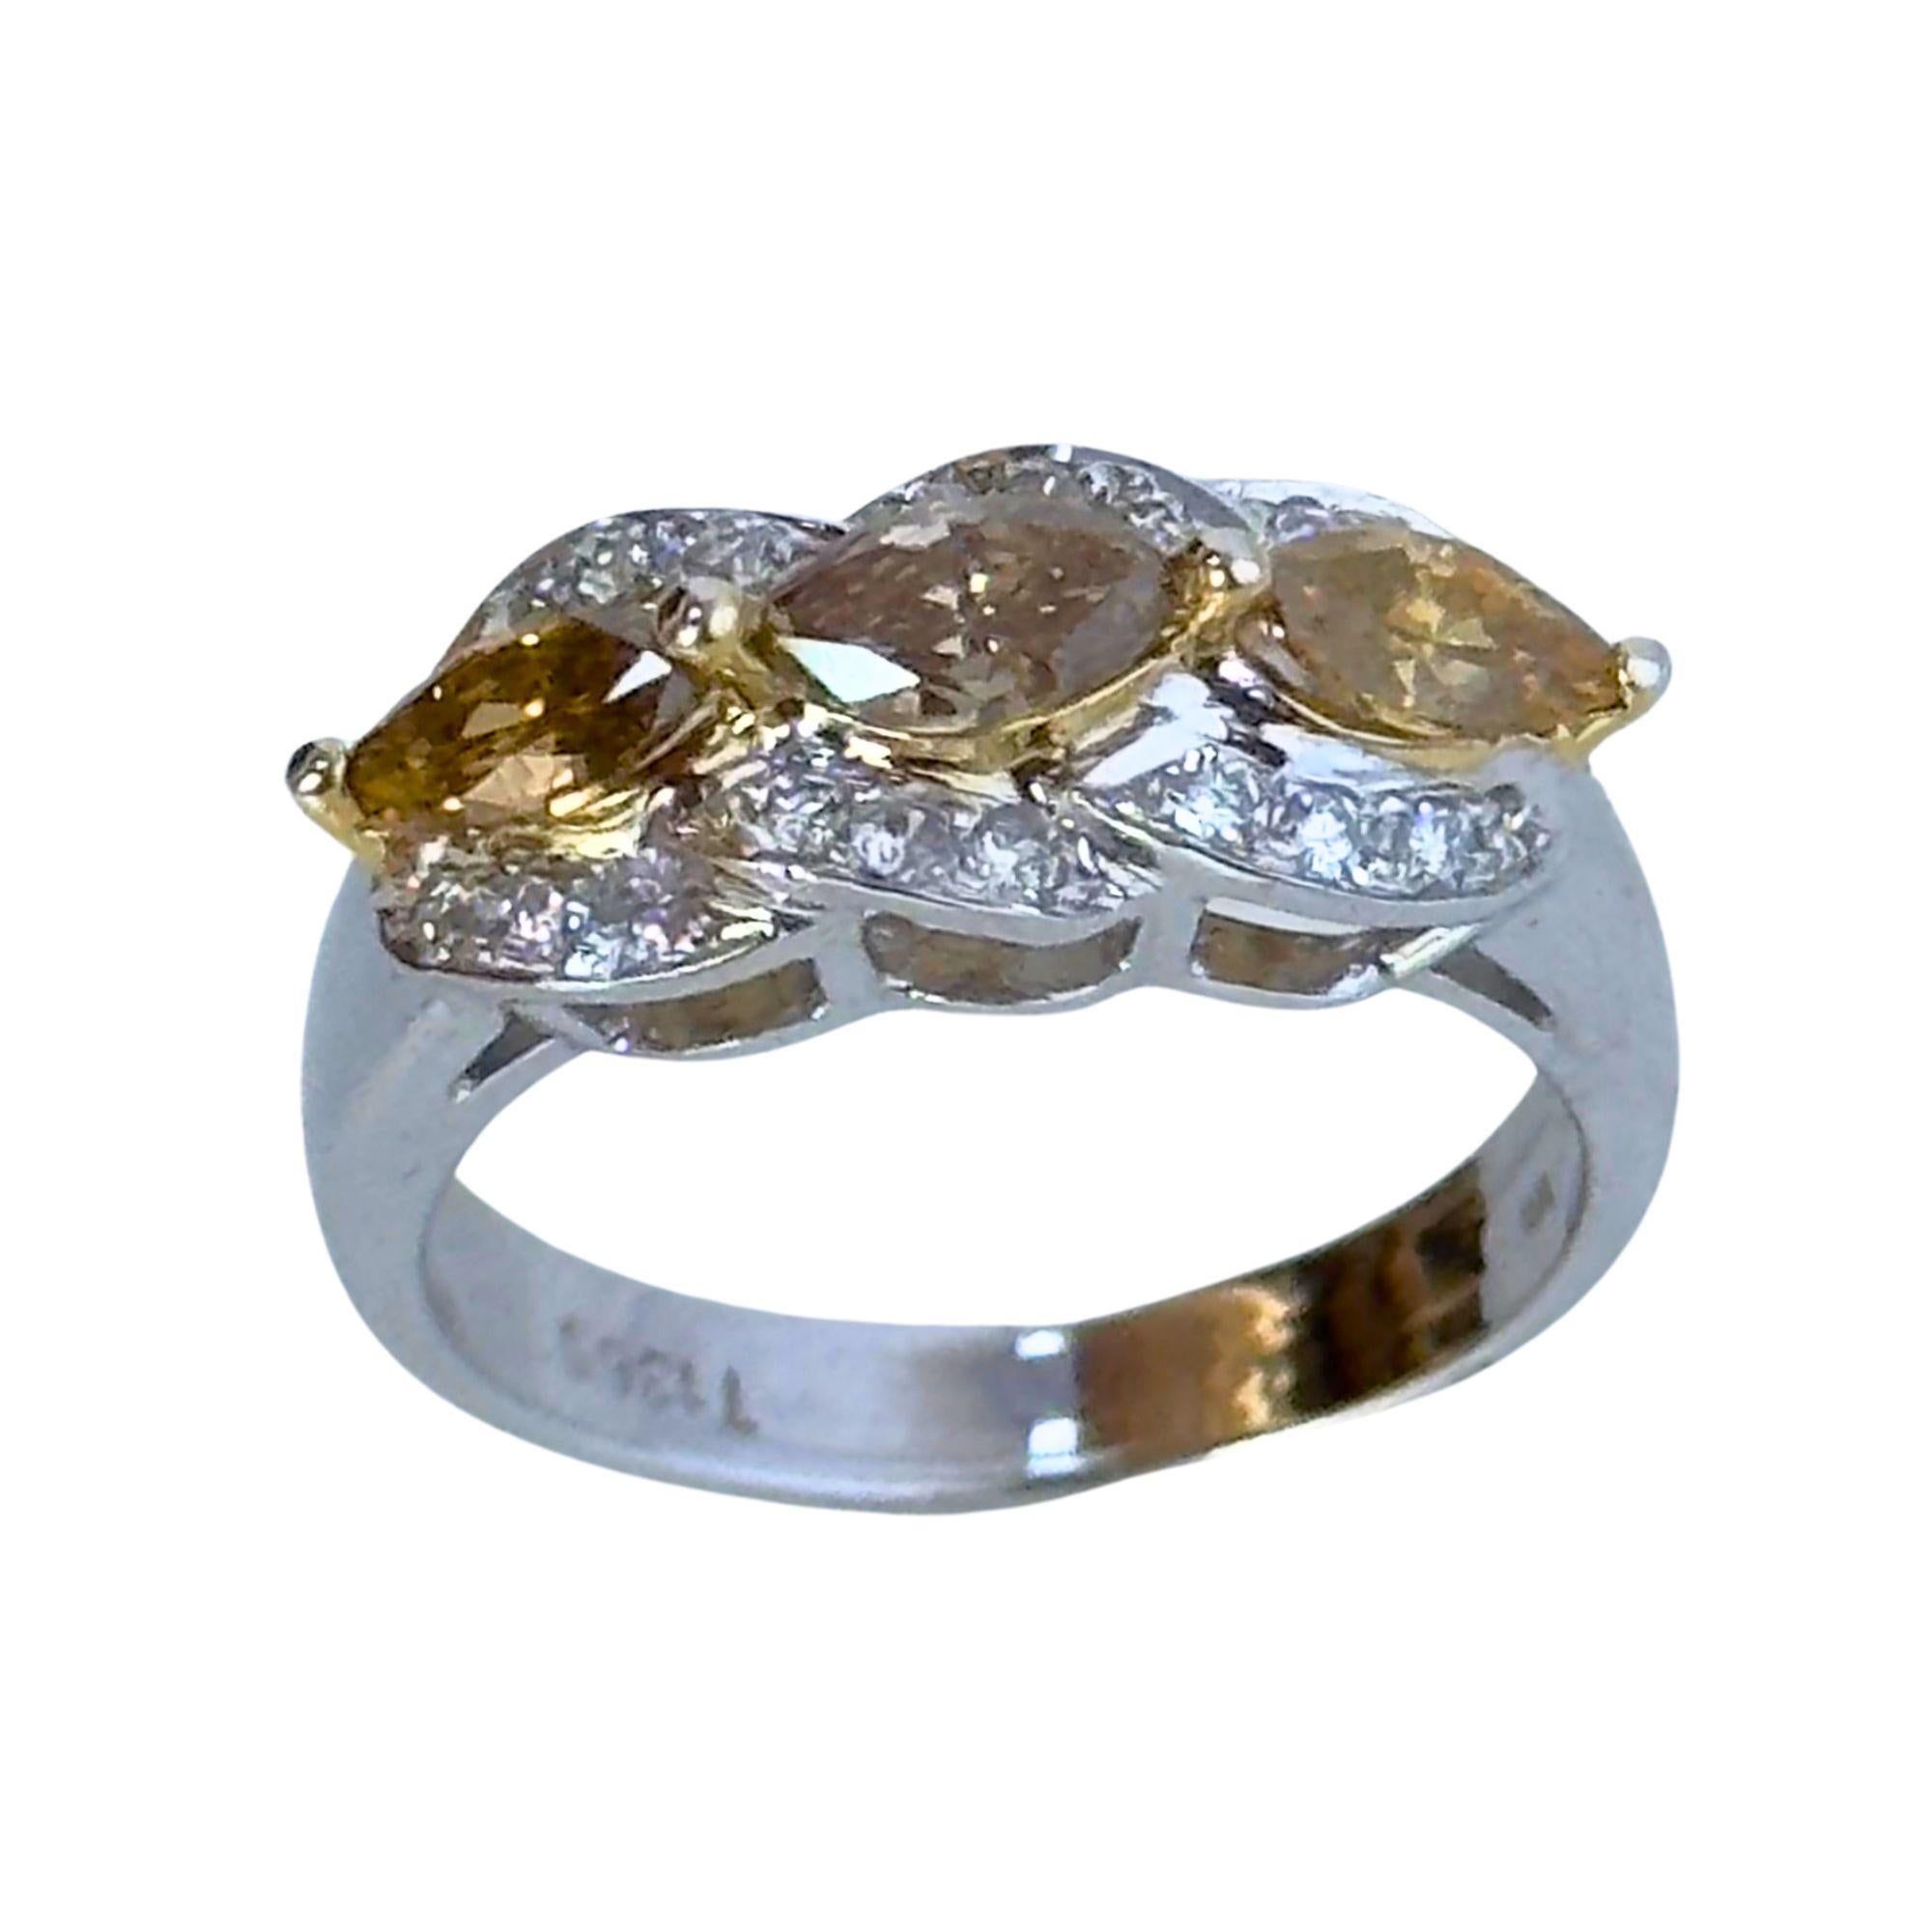 Introducing the 18k White and Yellow Marquise Diamond Ring. This ring features marquise-shaped white diamonds weighing 0.23 carats, accompanied by vibrant marquise yellow diamonds weighing 0.89 carats.

Crafted in a size 6, this ring is designed to